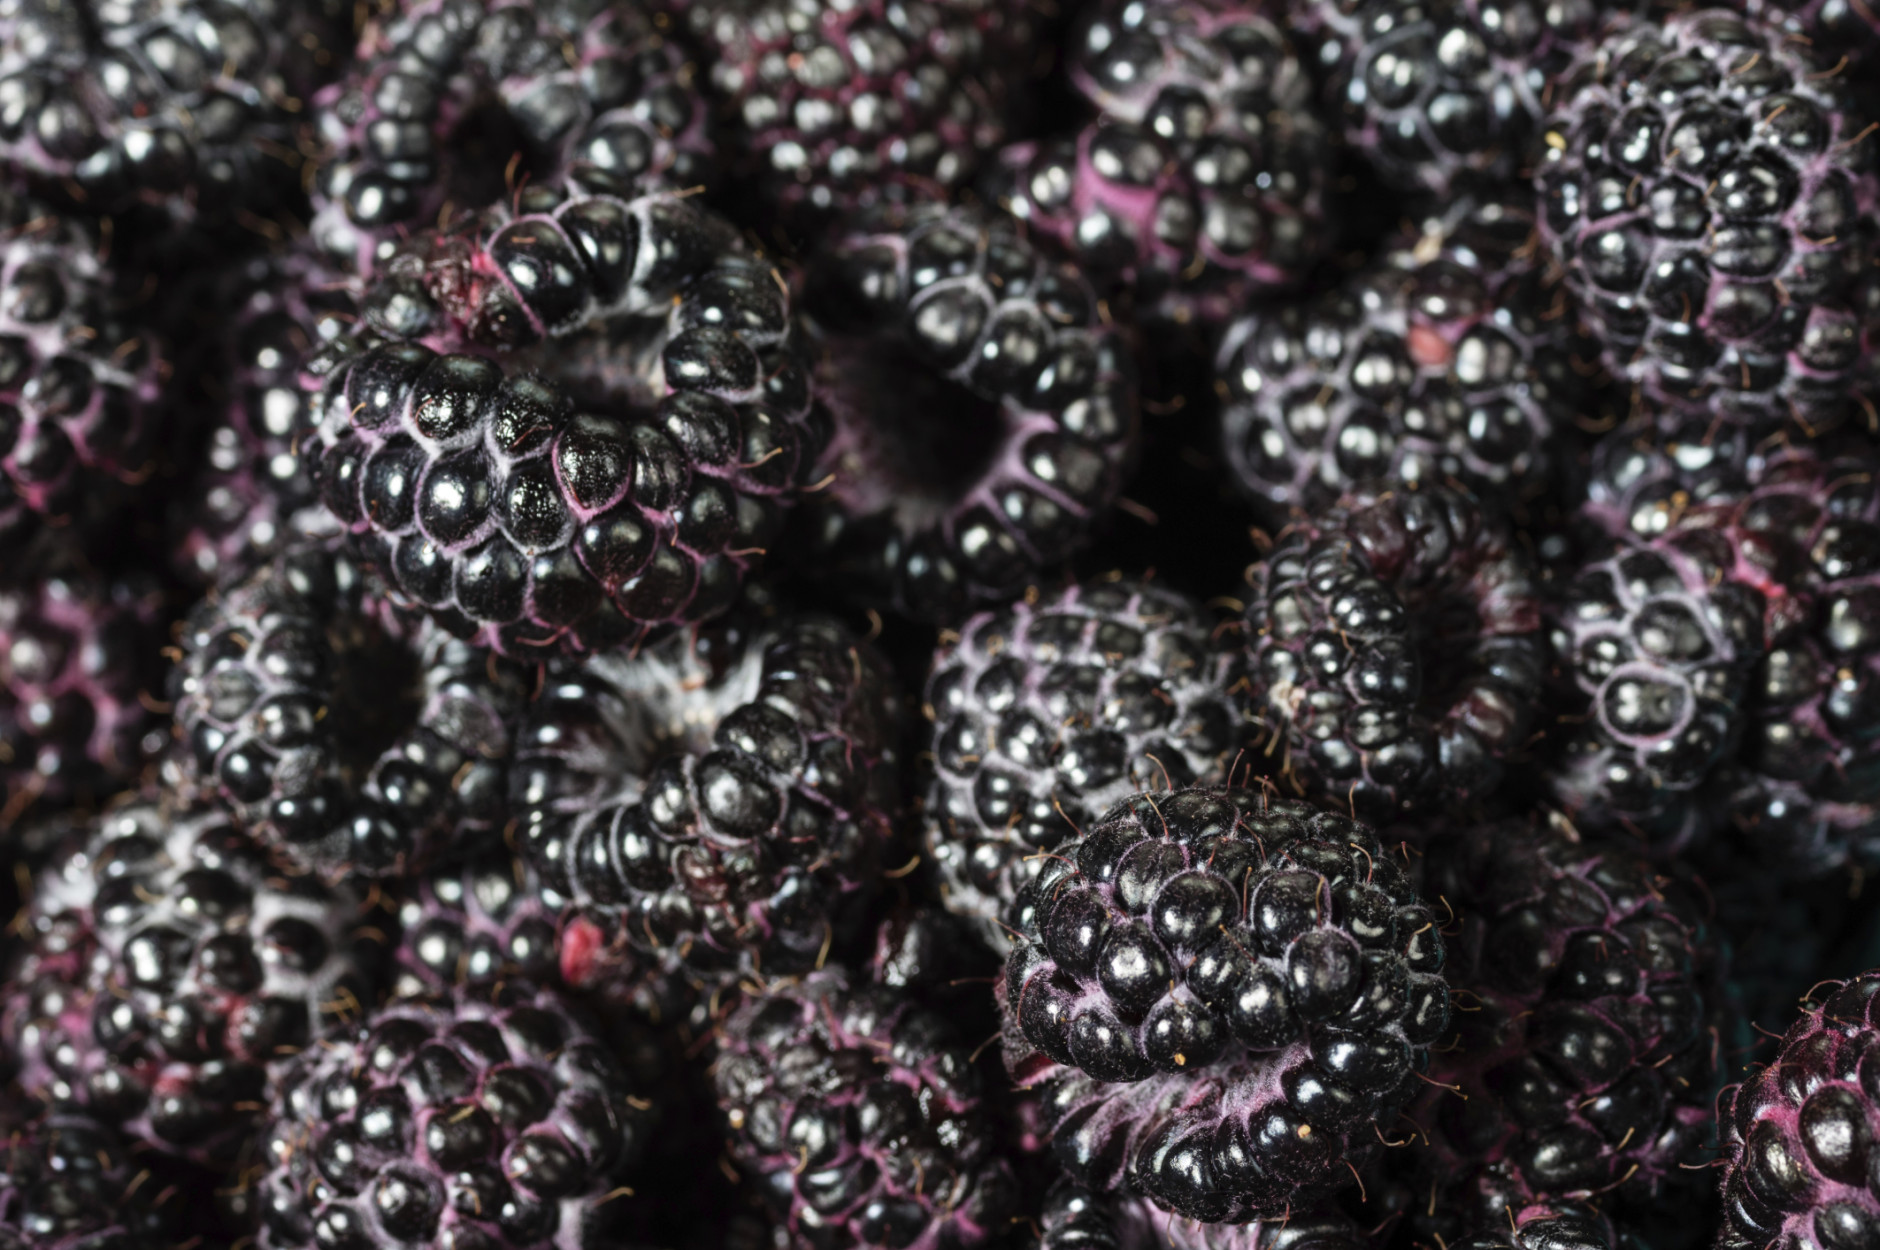 Research published in Open Chemistry says black raspberries have three times the antioxidants of red raspberries and blackberries. (Thinkstock)